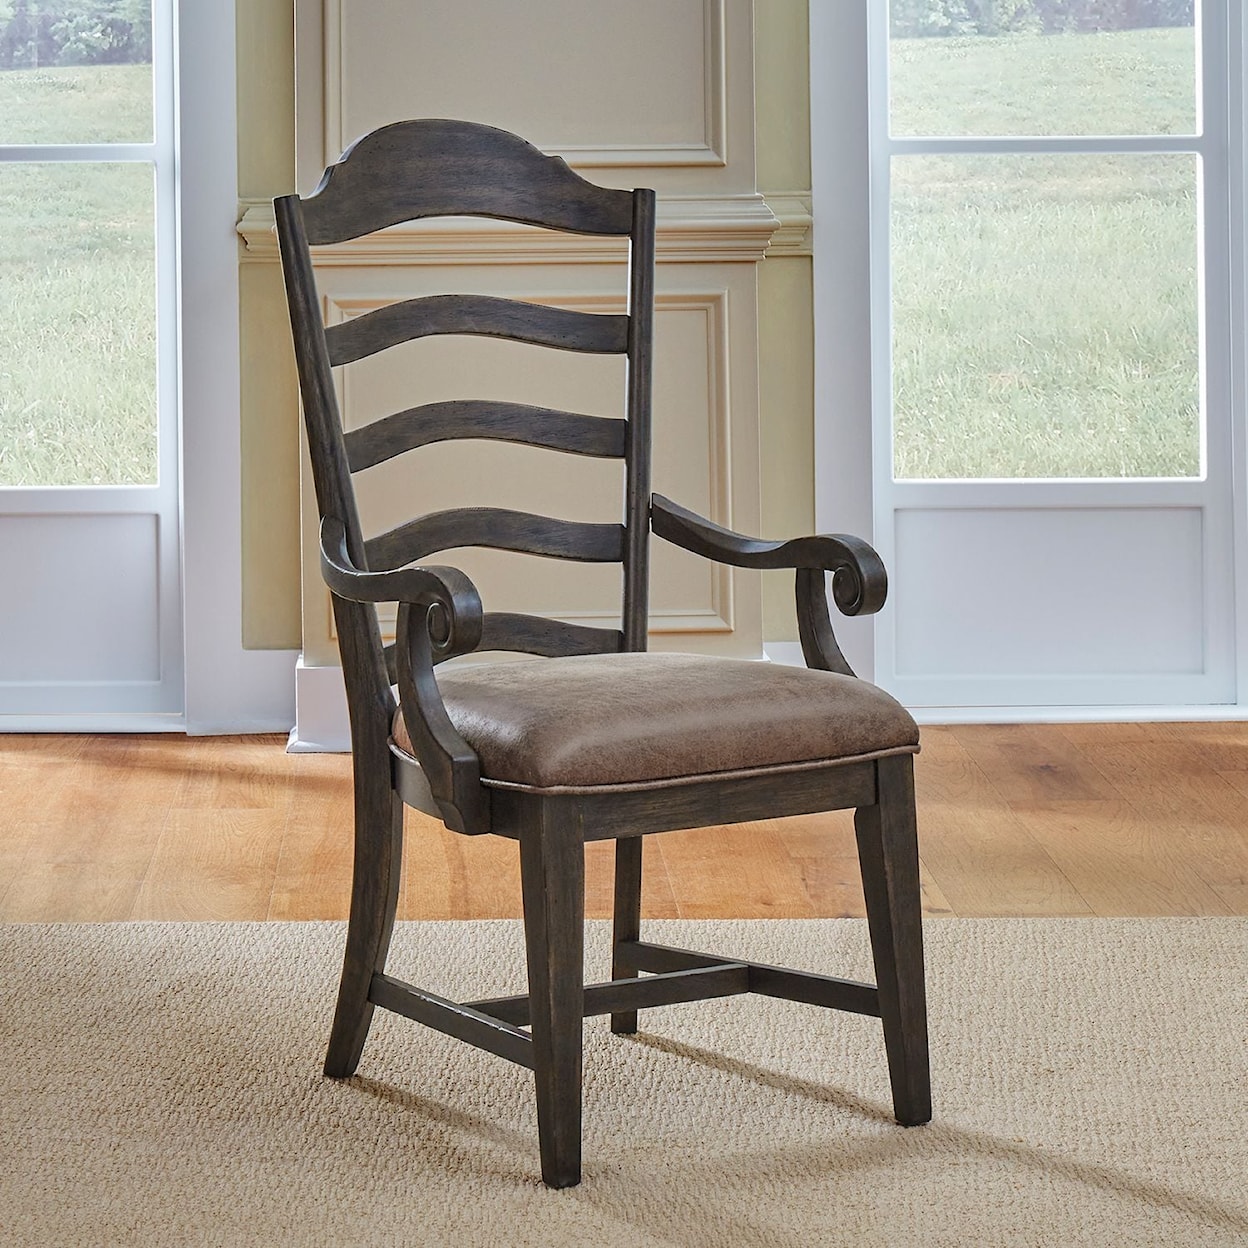 Liberty Furniture Paradise Valley Upholstered Ladder-Back Arm Chair